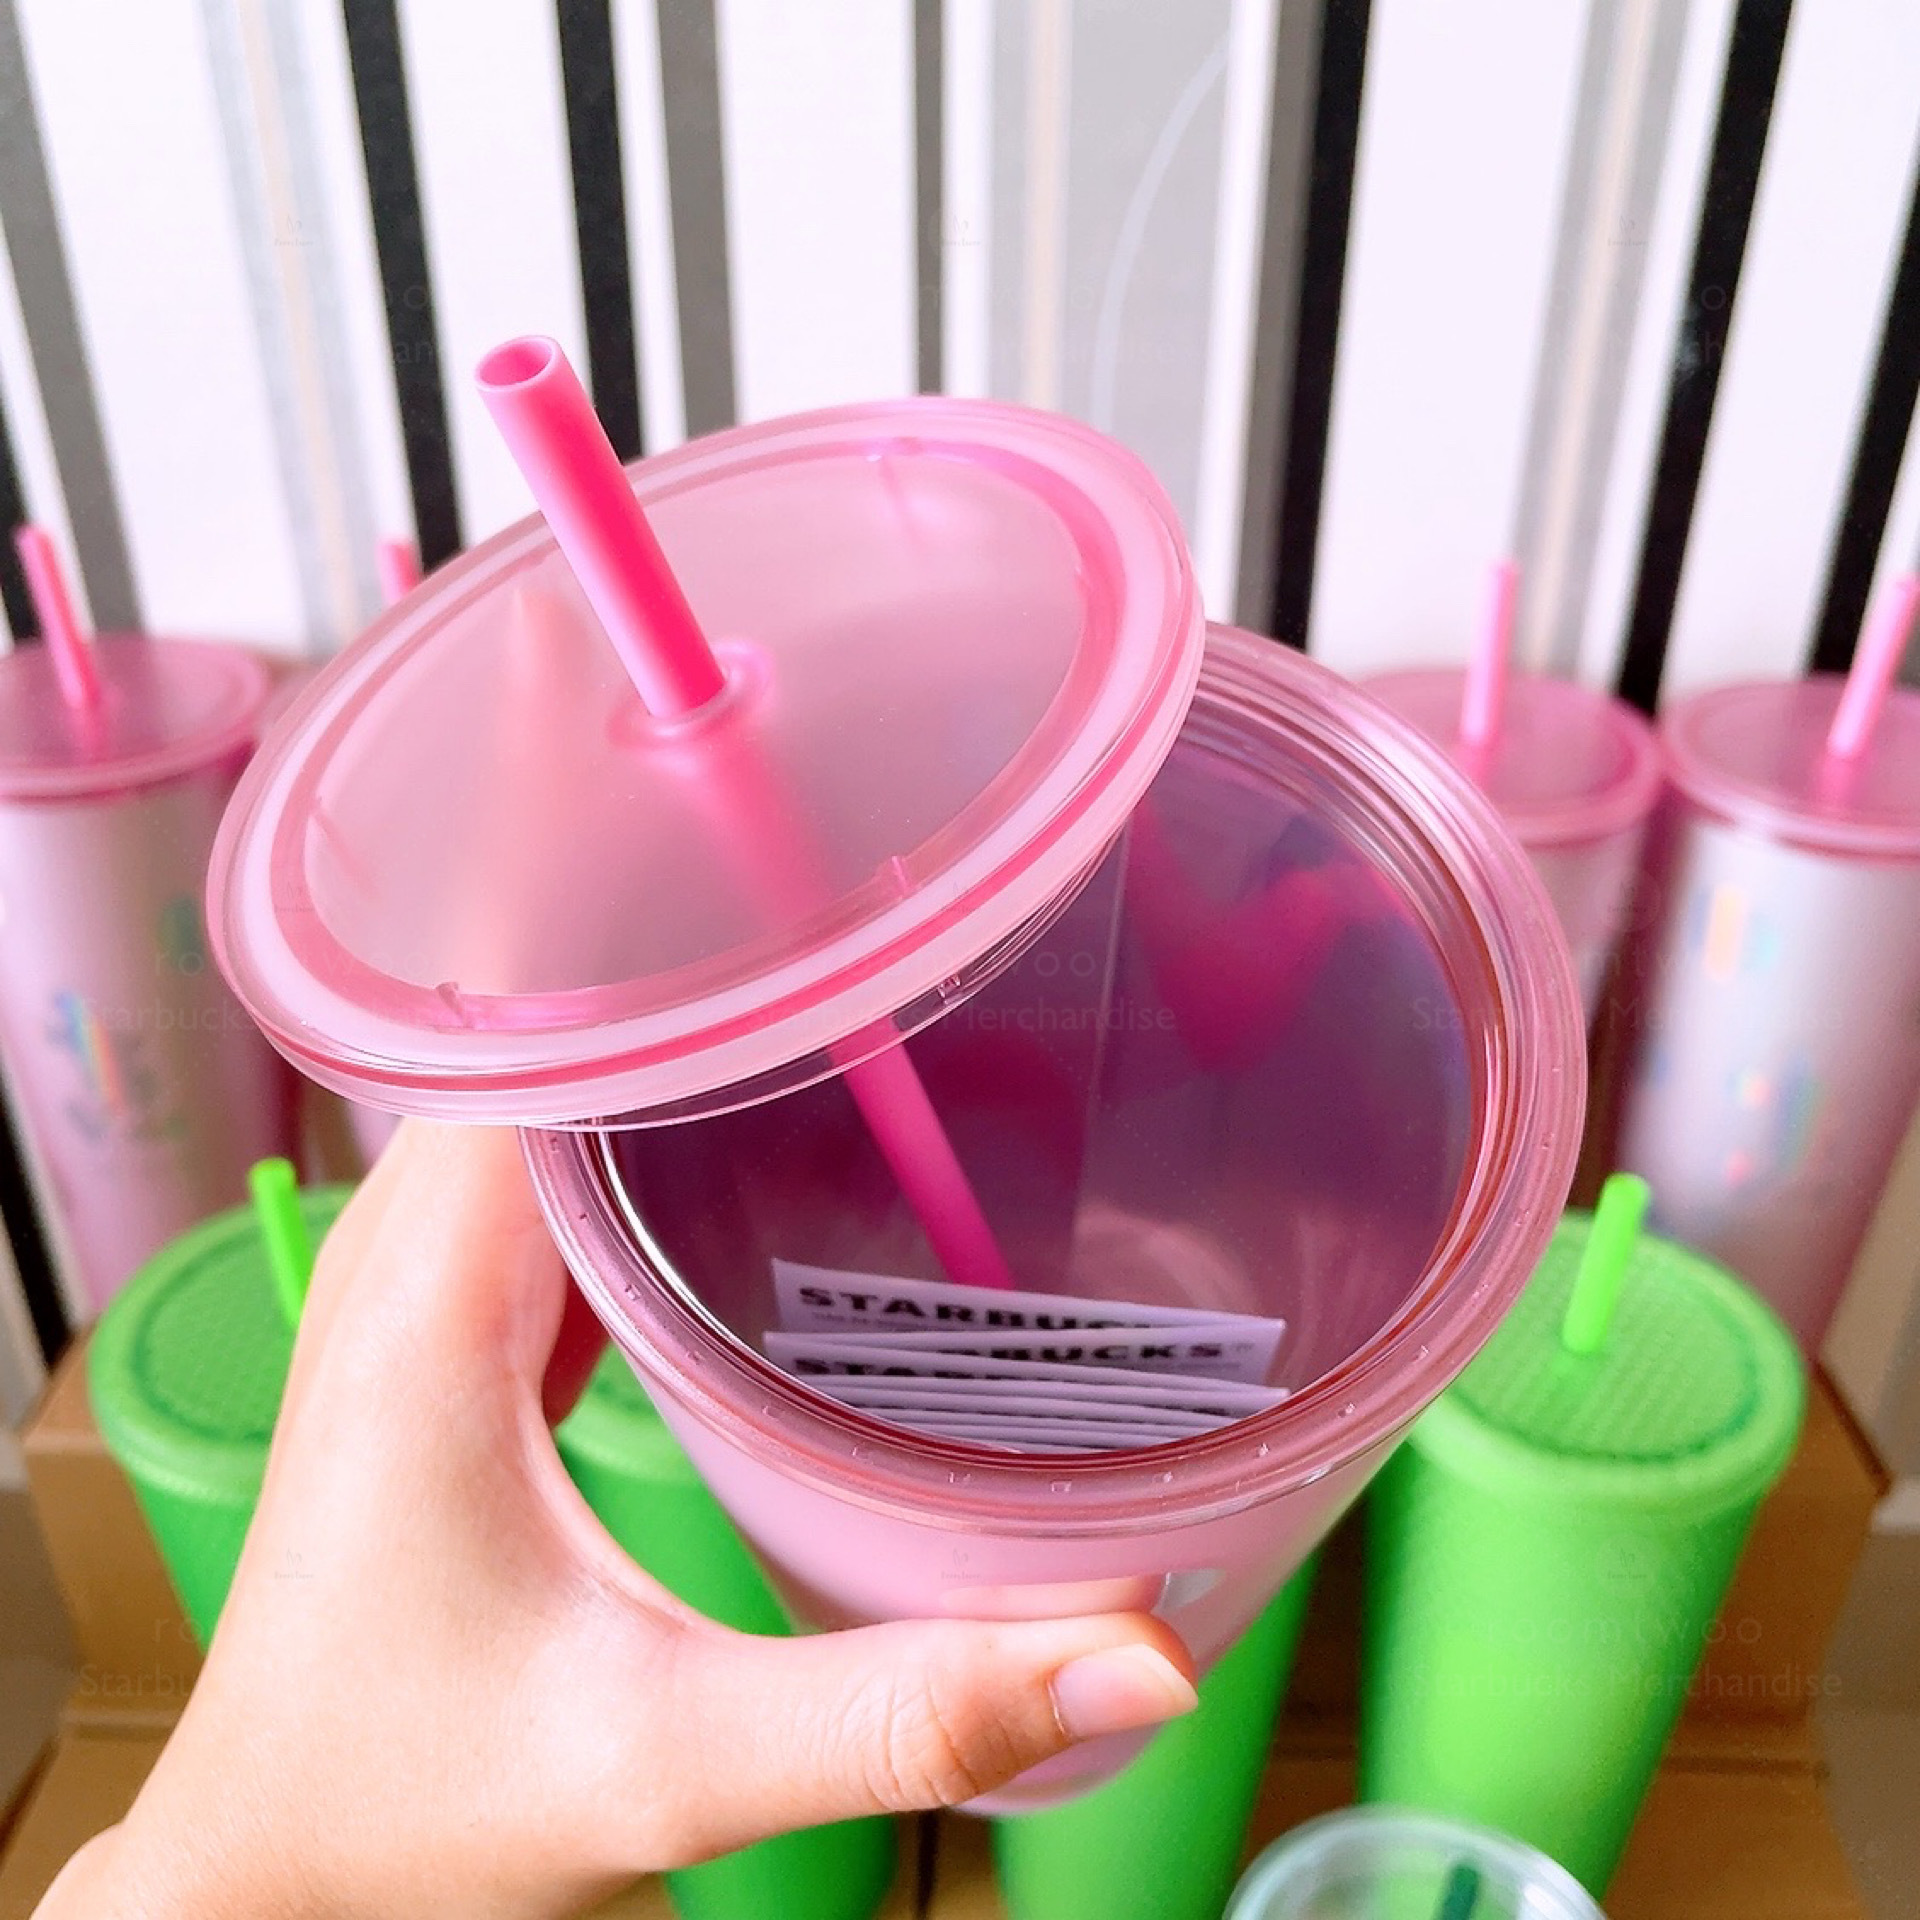 Soft Touch Soda Cup with Straw 630ml - Pink